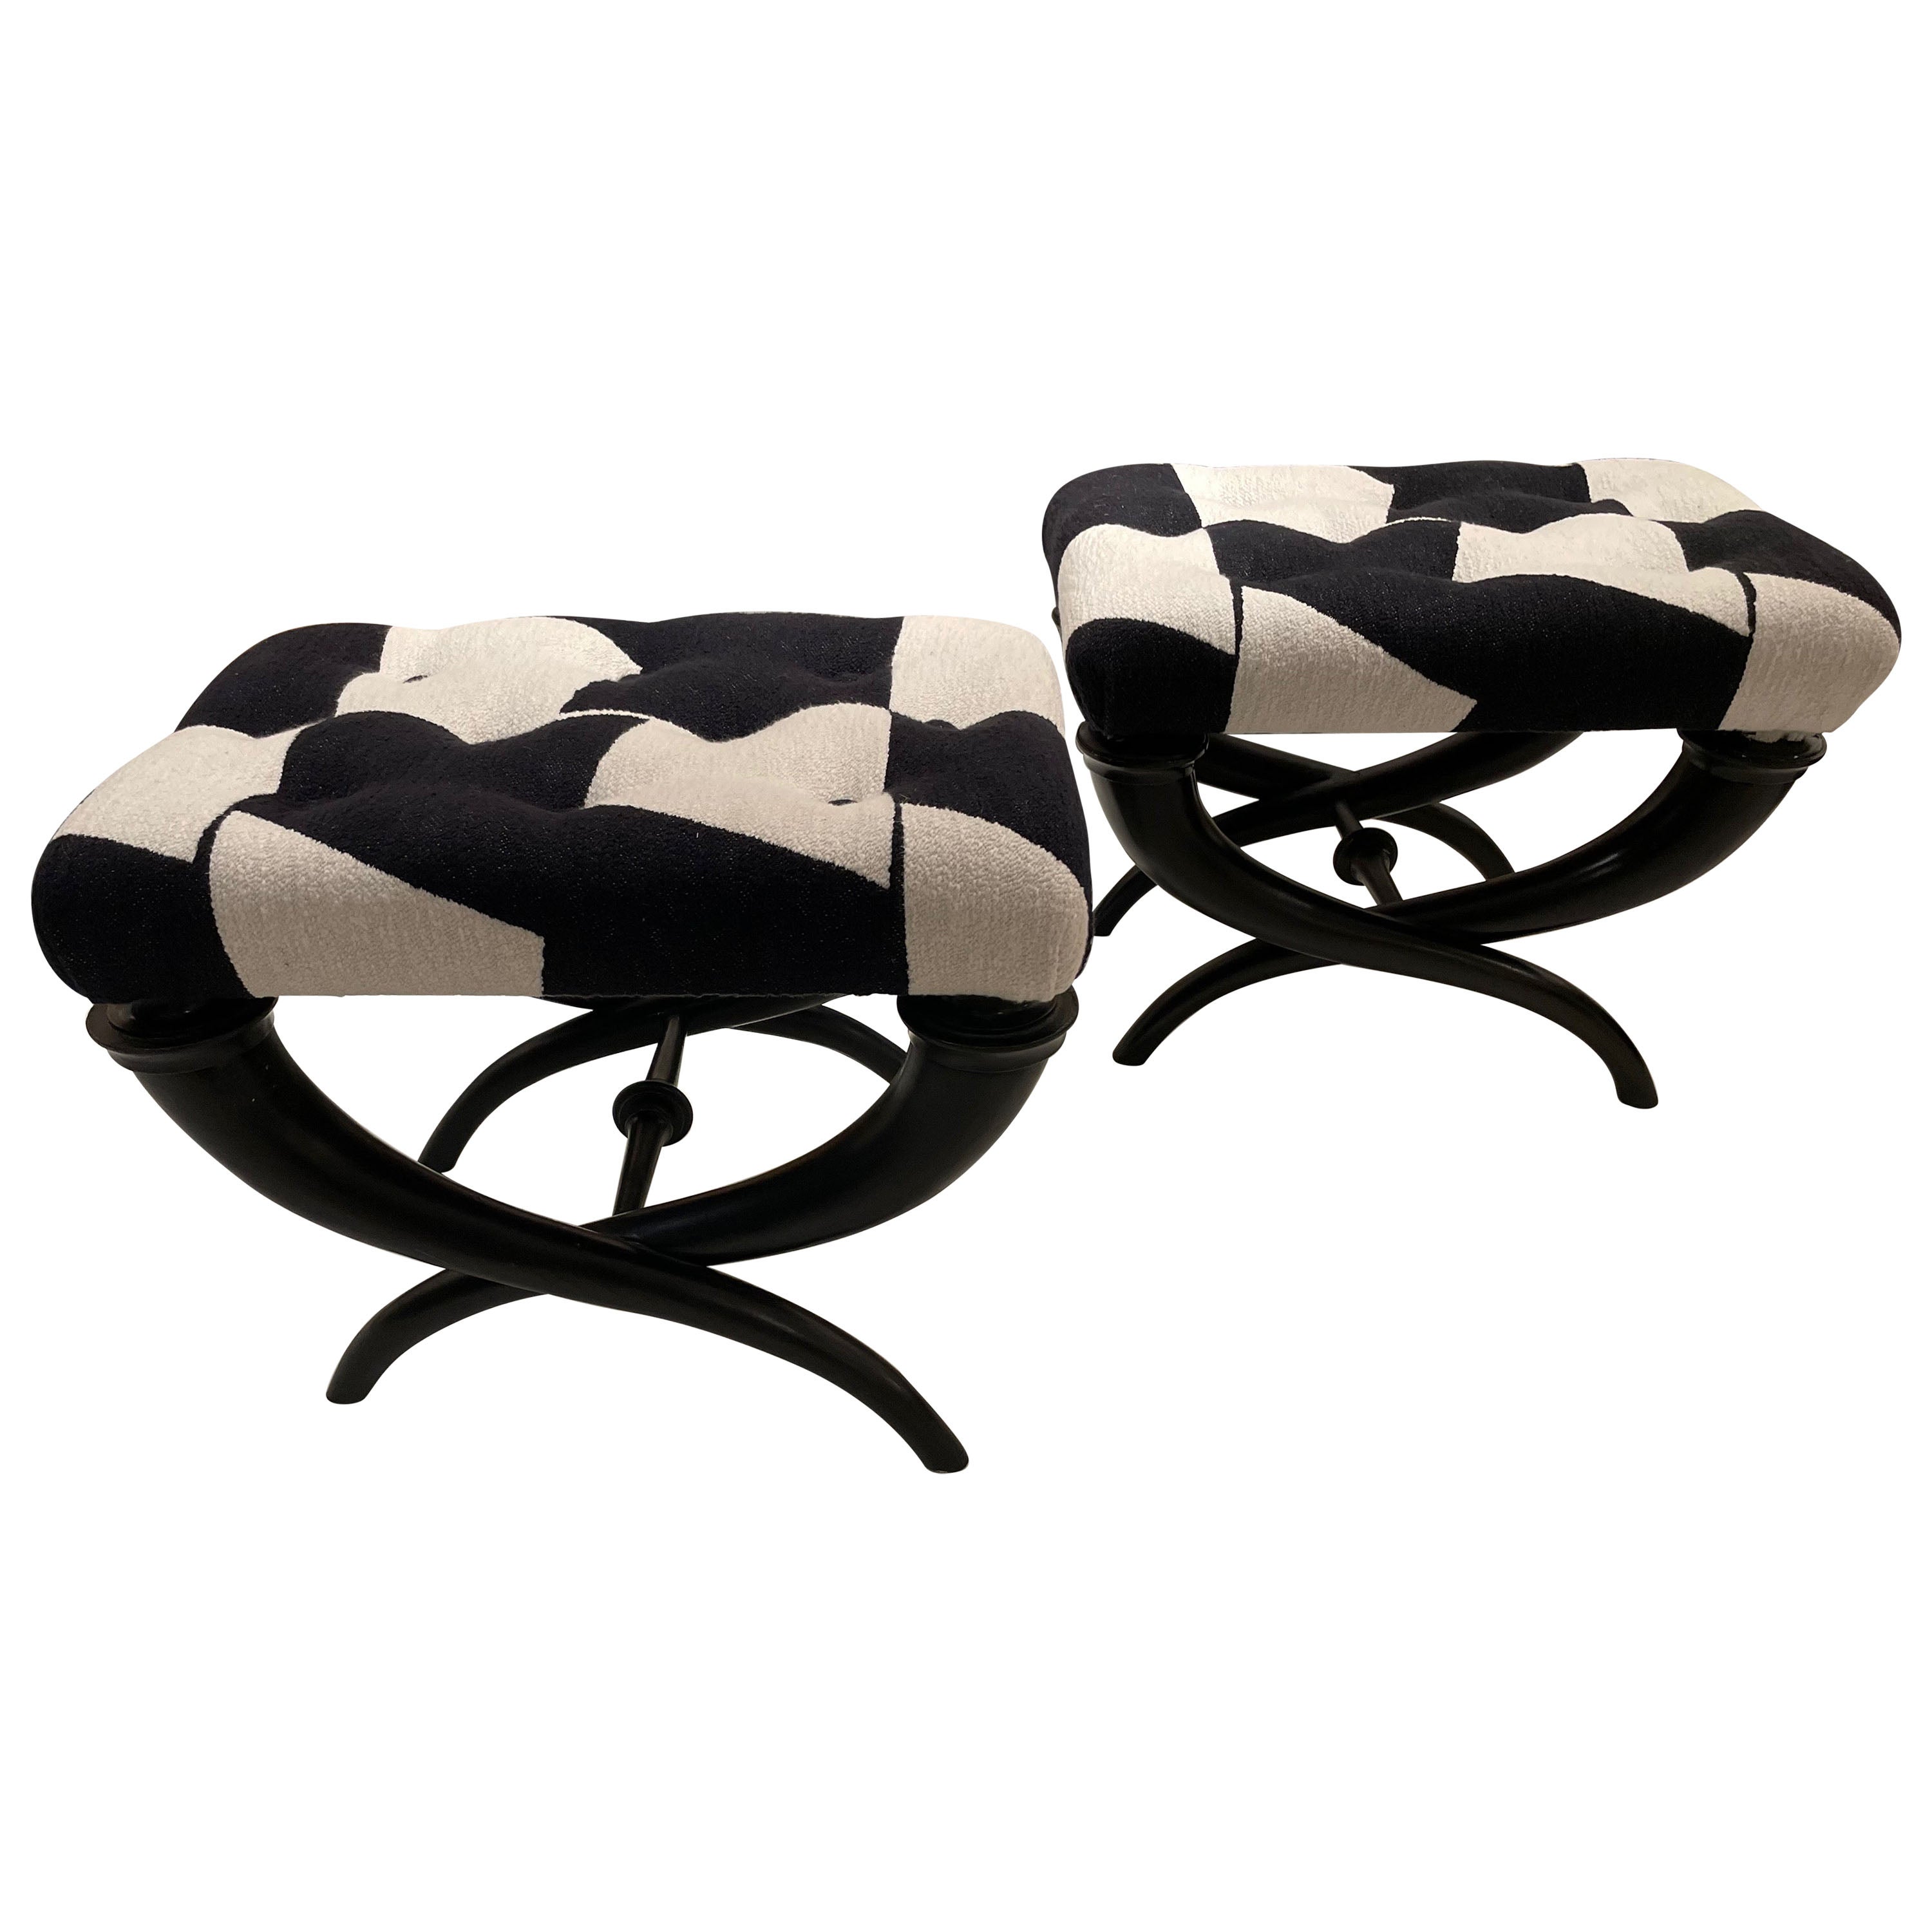 Pair of Art Deco Black Lacquer Ottomans Attributed by Dominique France 1935.